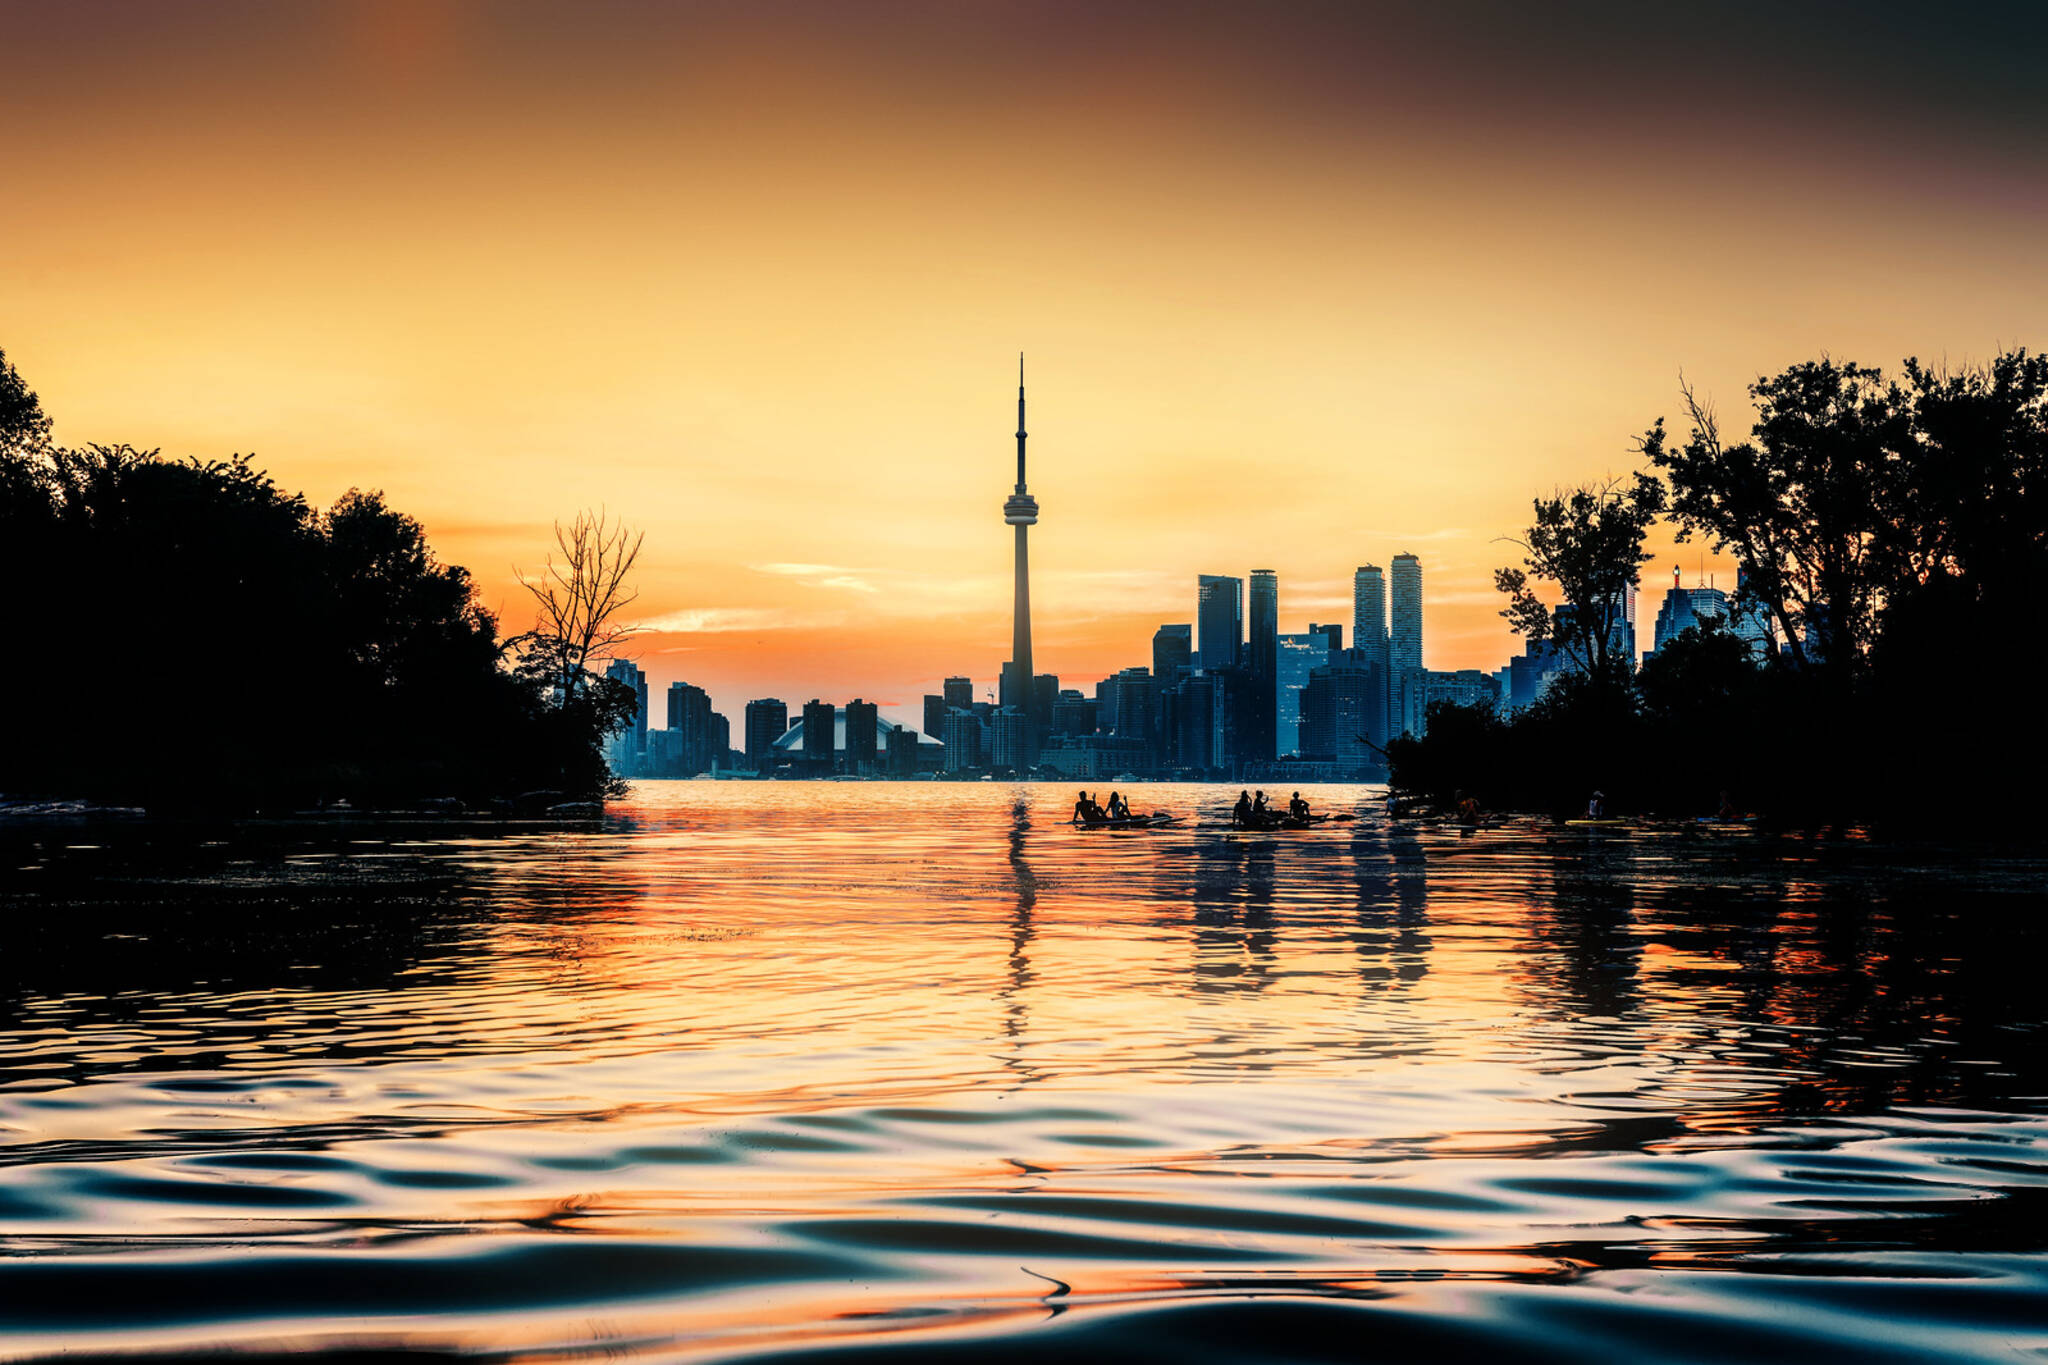 Toronto is going to be hot and humid this September